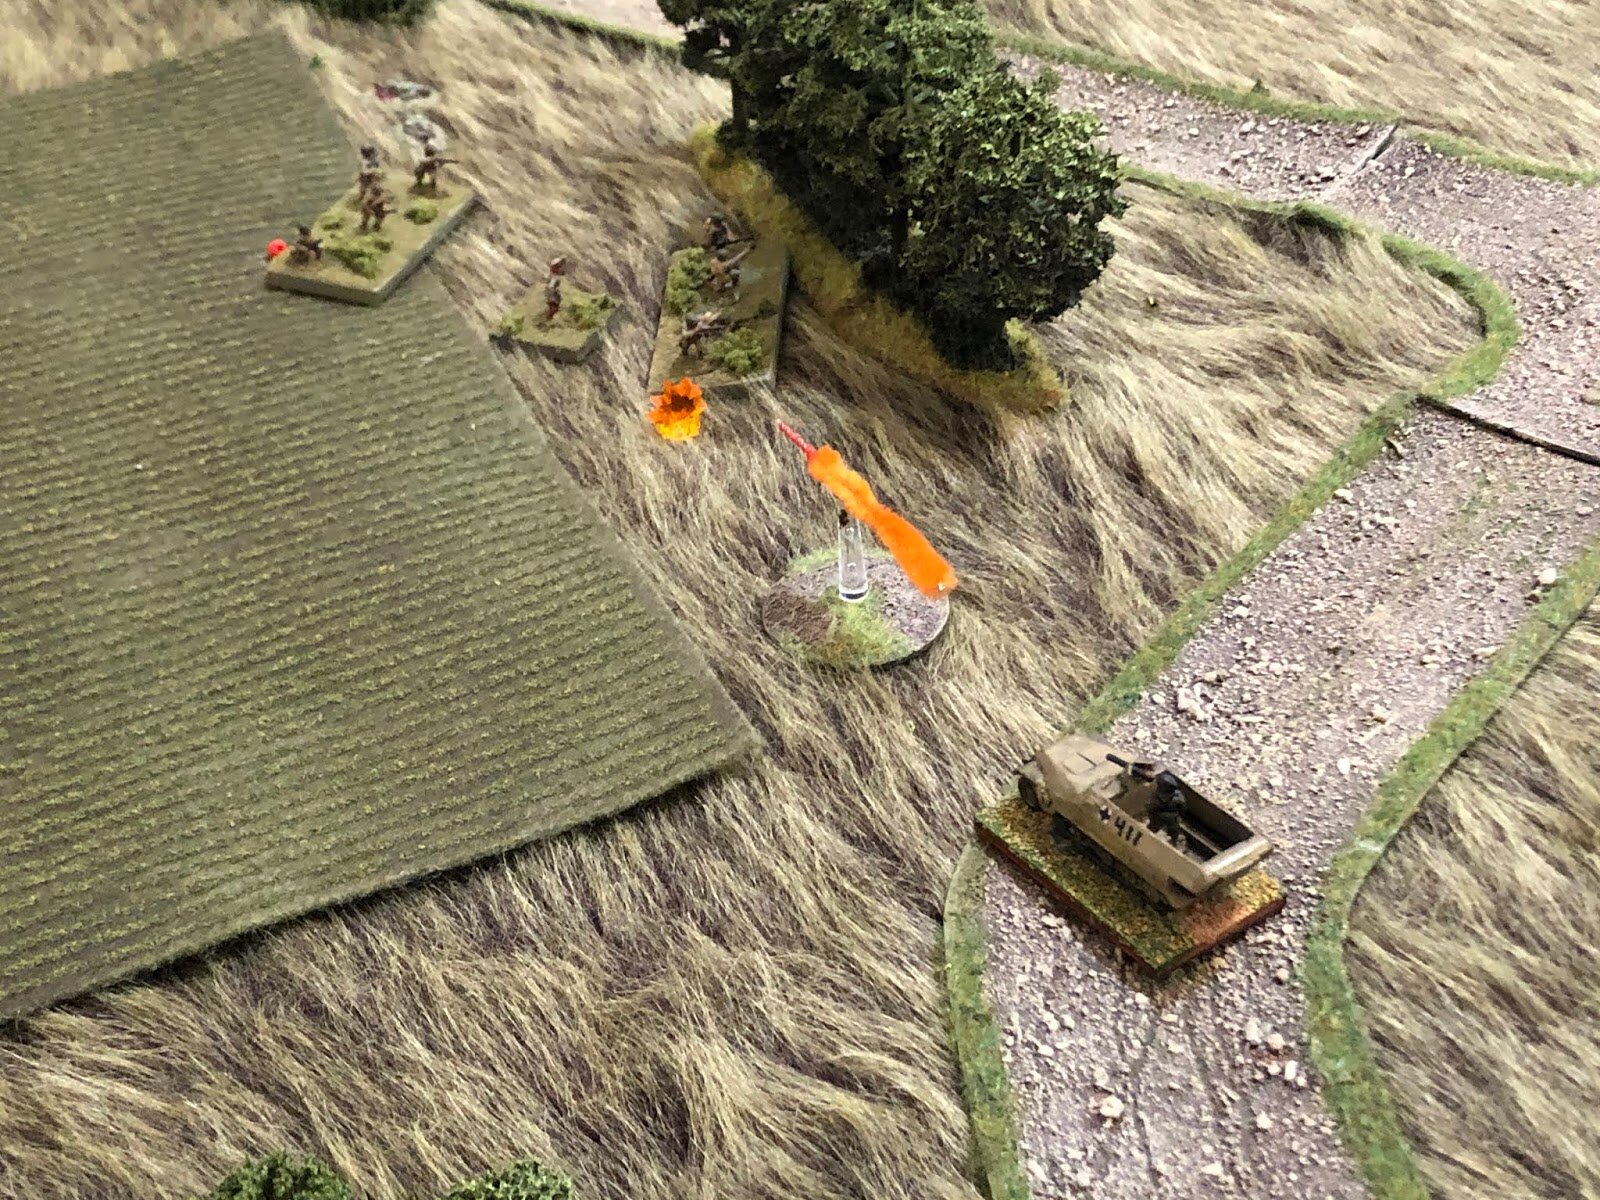  The halftrack's MG continues spewing lead... 